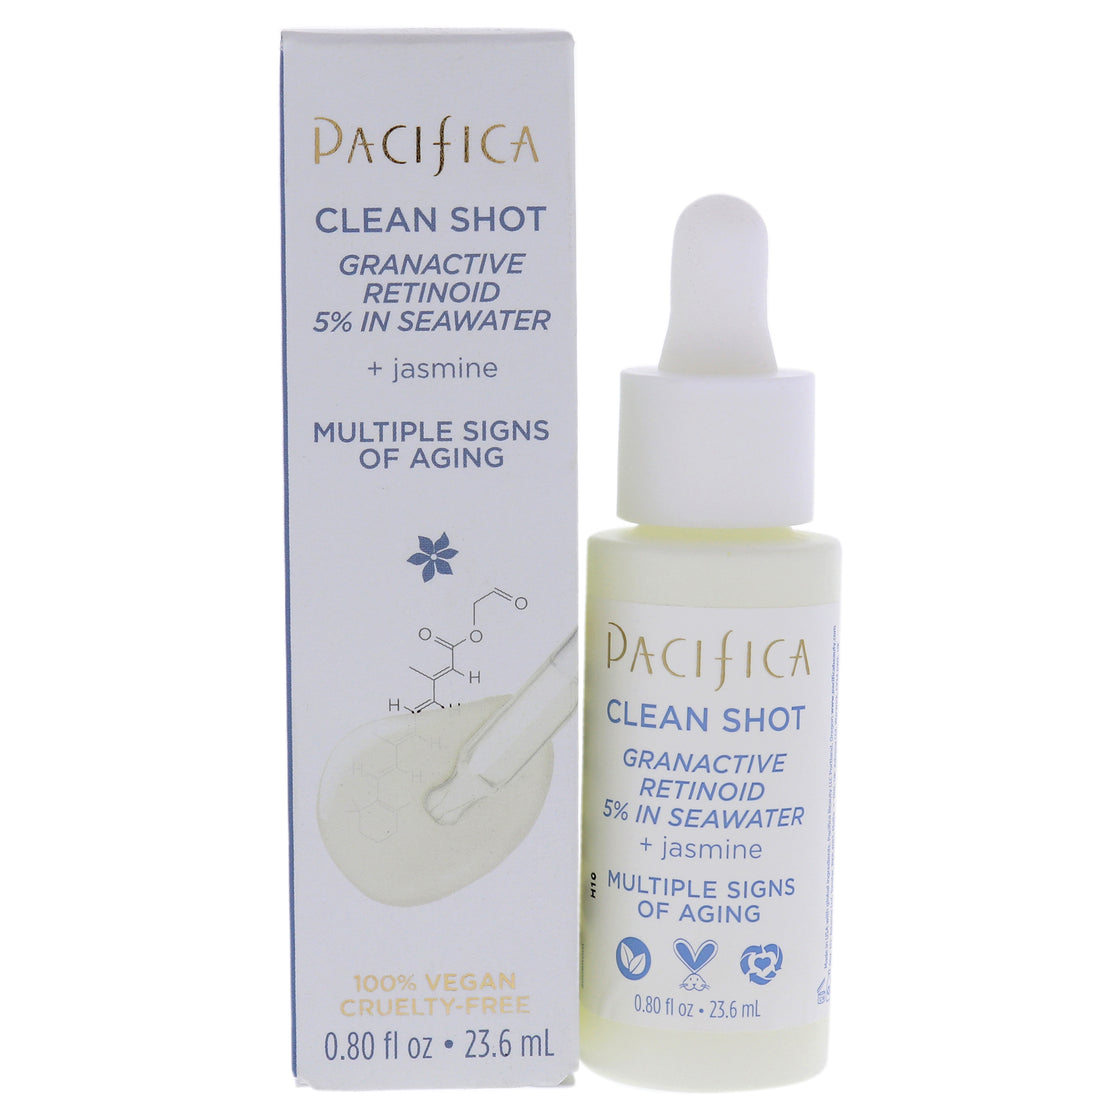 Clean Shot Granactive Retinoid 5 Percent In Seawater by Pacifica for Unisex - 0.8 oz Serum